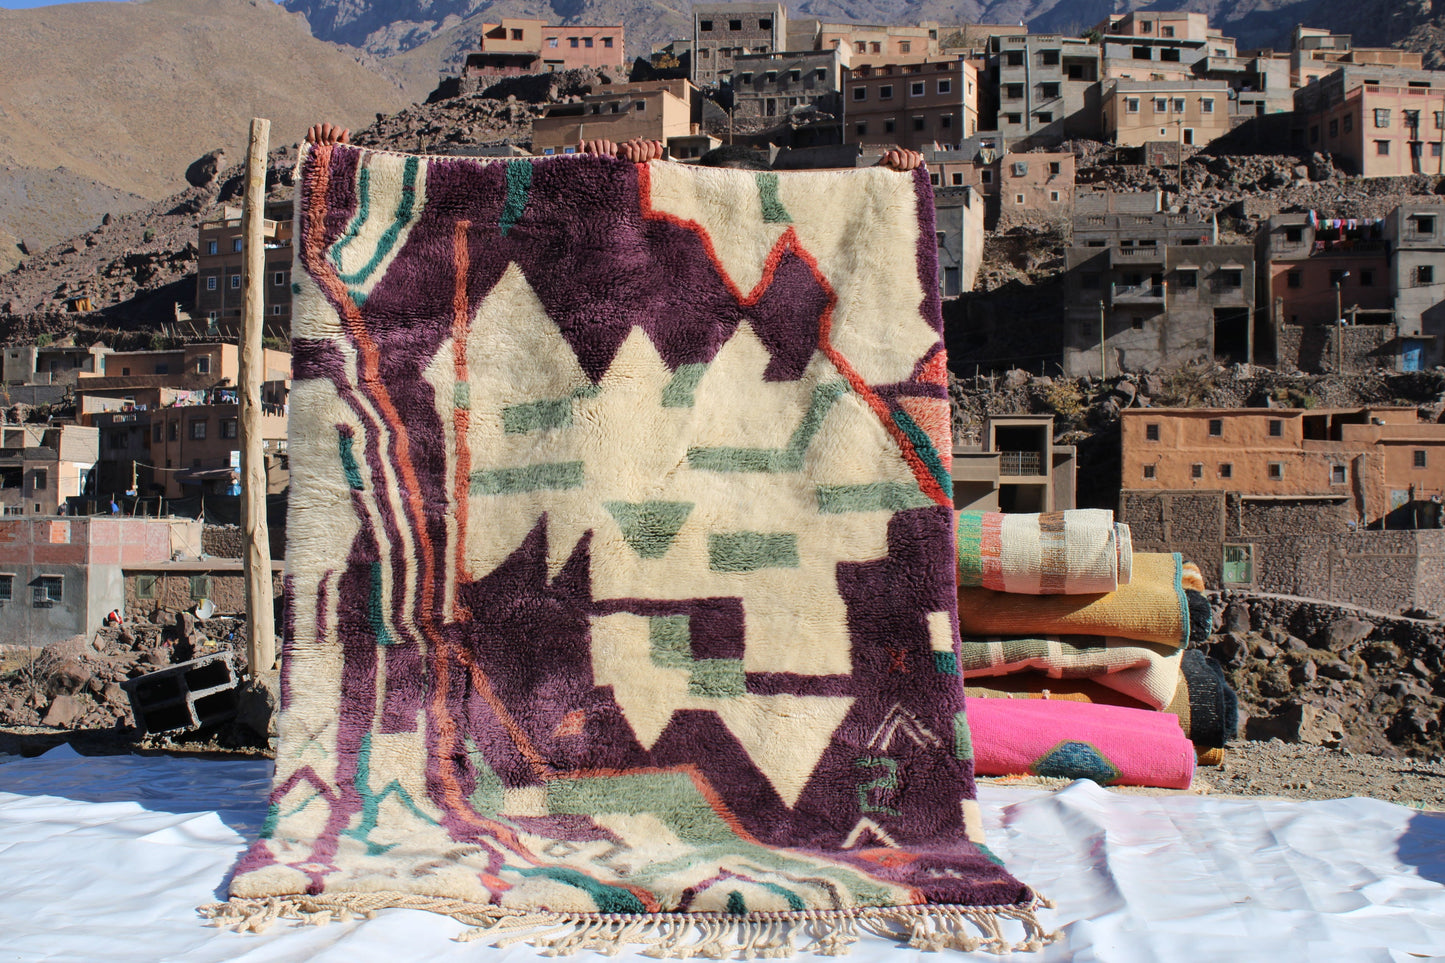 Beni Ourain rugs originate from the Atlas Mountains of Morocco and are characterized by their distinctive, neutral-toned, and geometric designs. These handwoven rugs often feature a plush pile and are made by the Berber tribes,  size is 224x160 cm